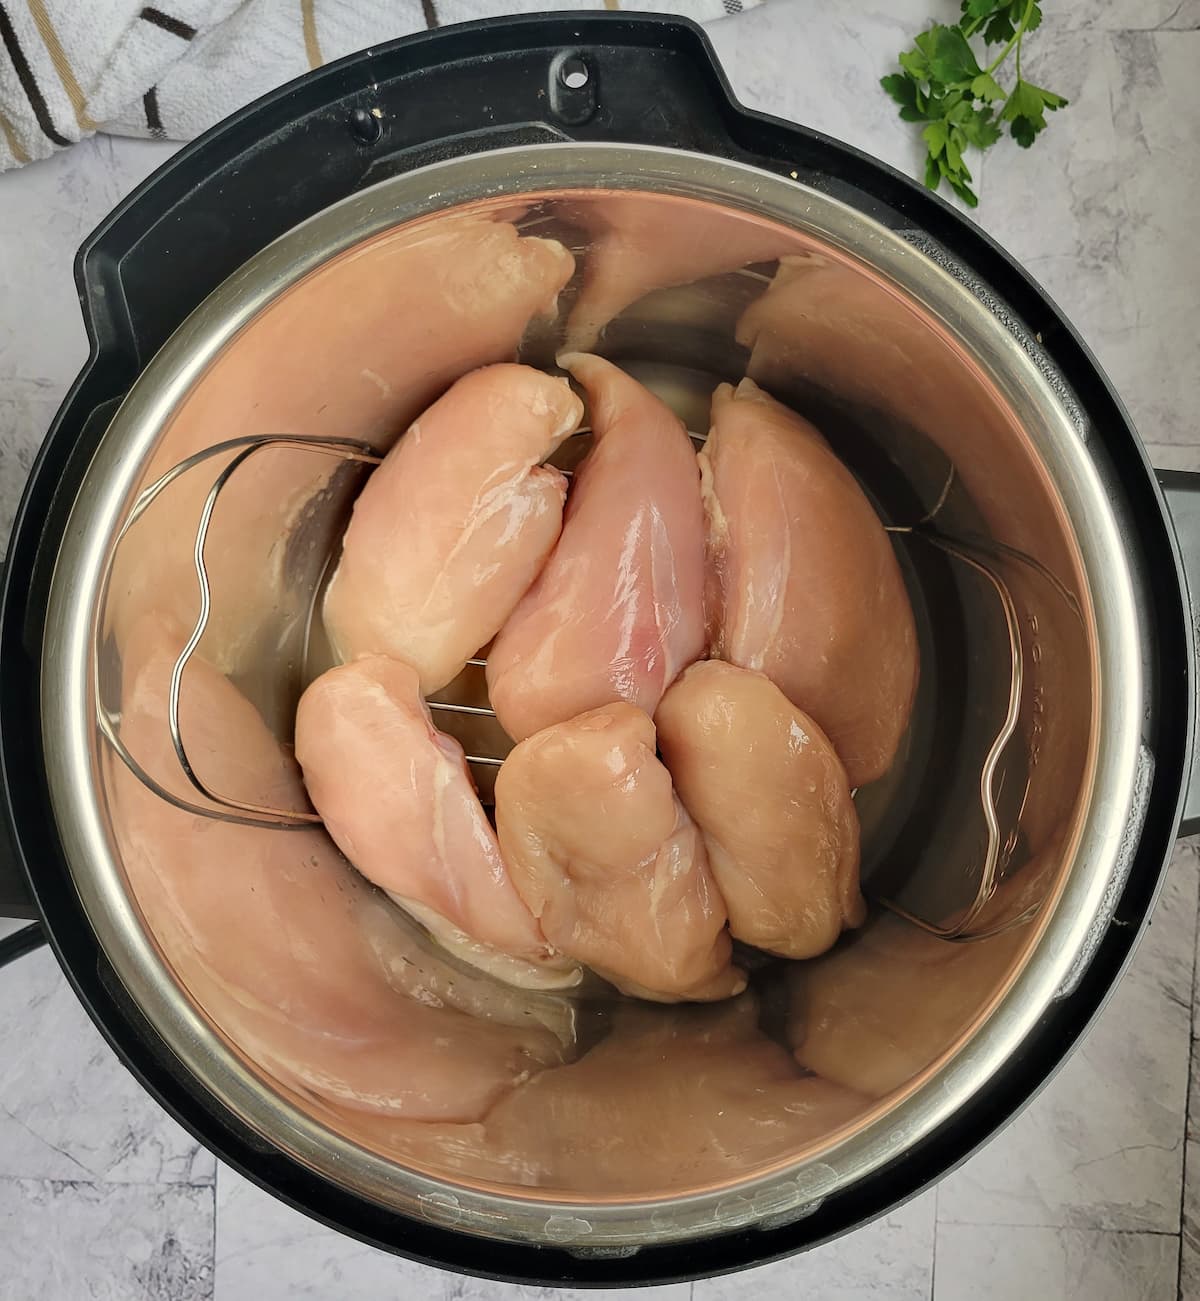 6 raw chicken breasts on the metal trivet in the instant pot